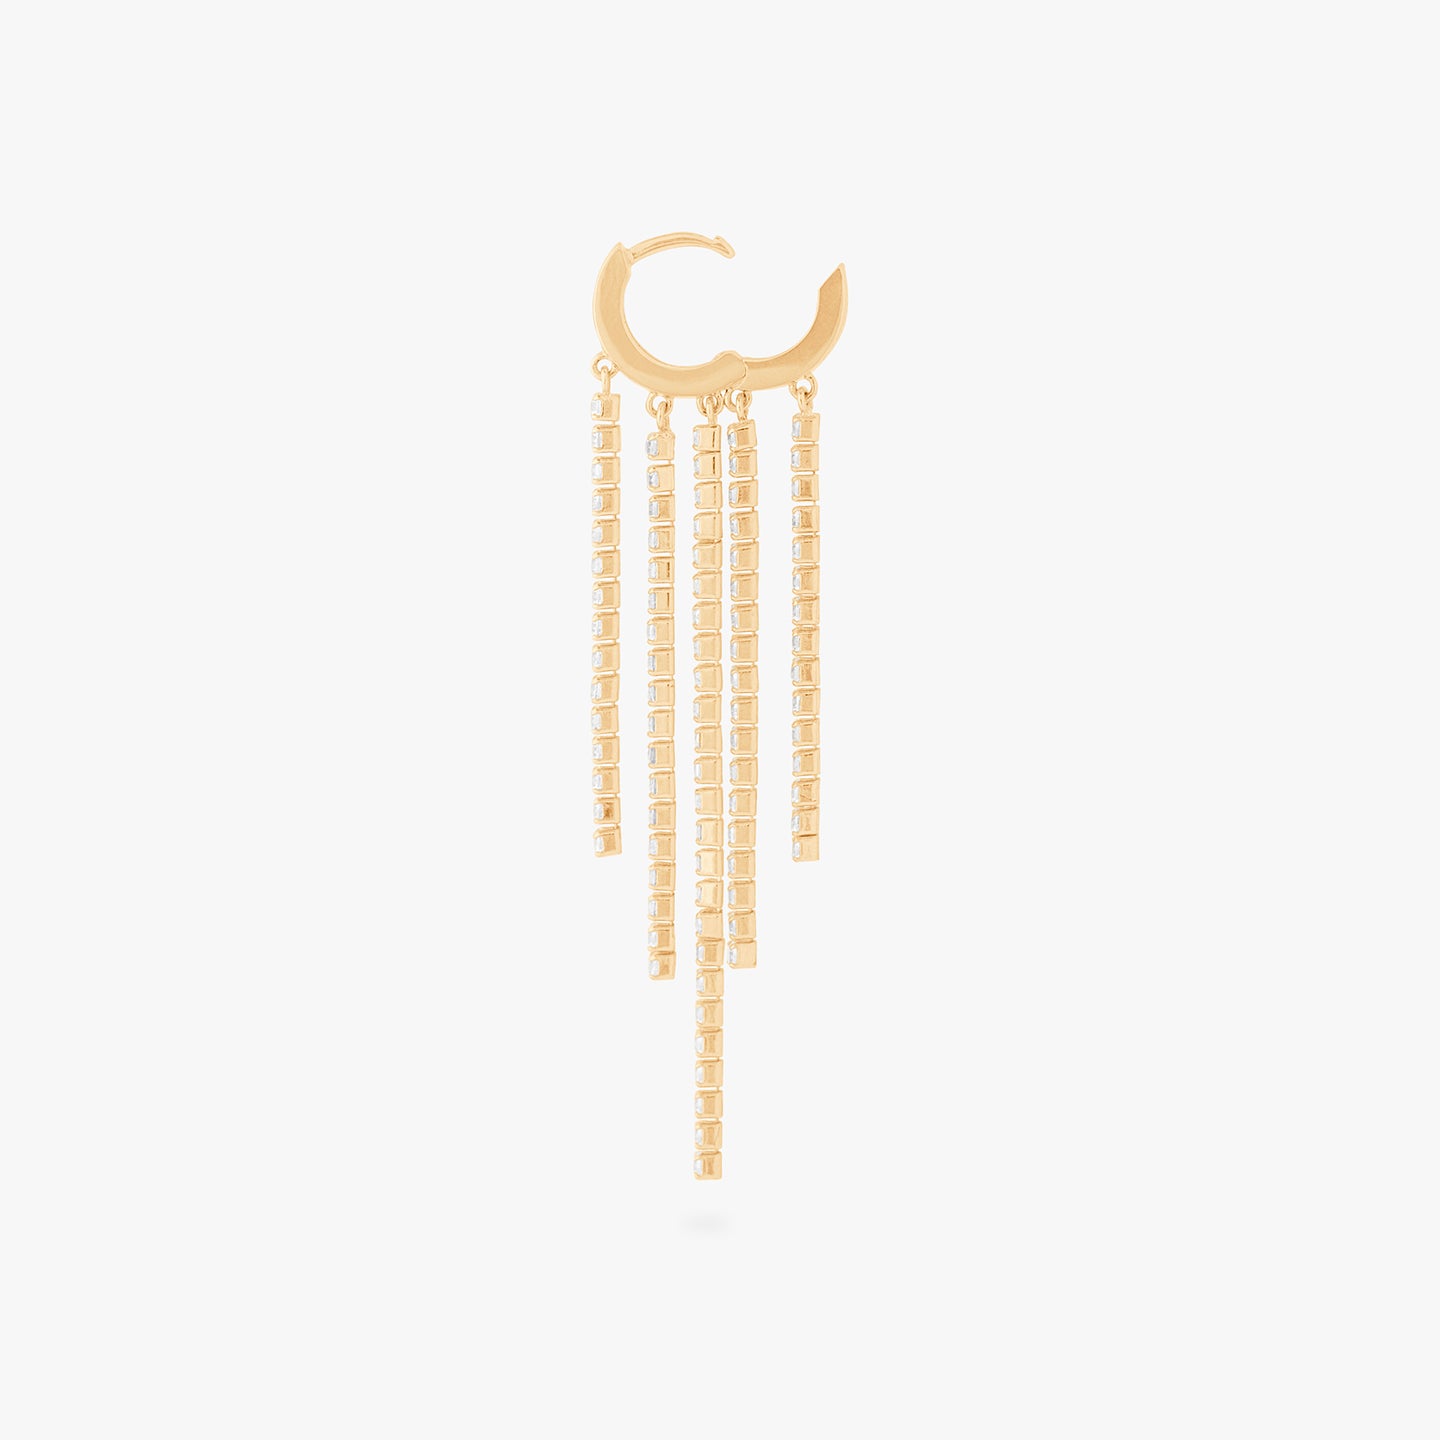 This is an image of a gold huggie that has gold/clear CZ strands dangling from it in a fringed pattern unhinged. color:null|gold/clear